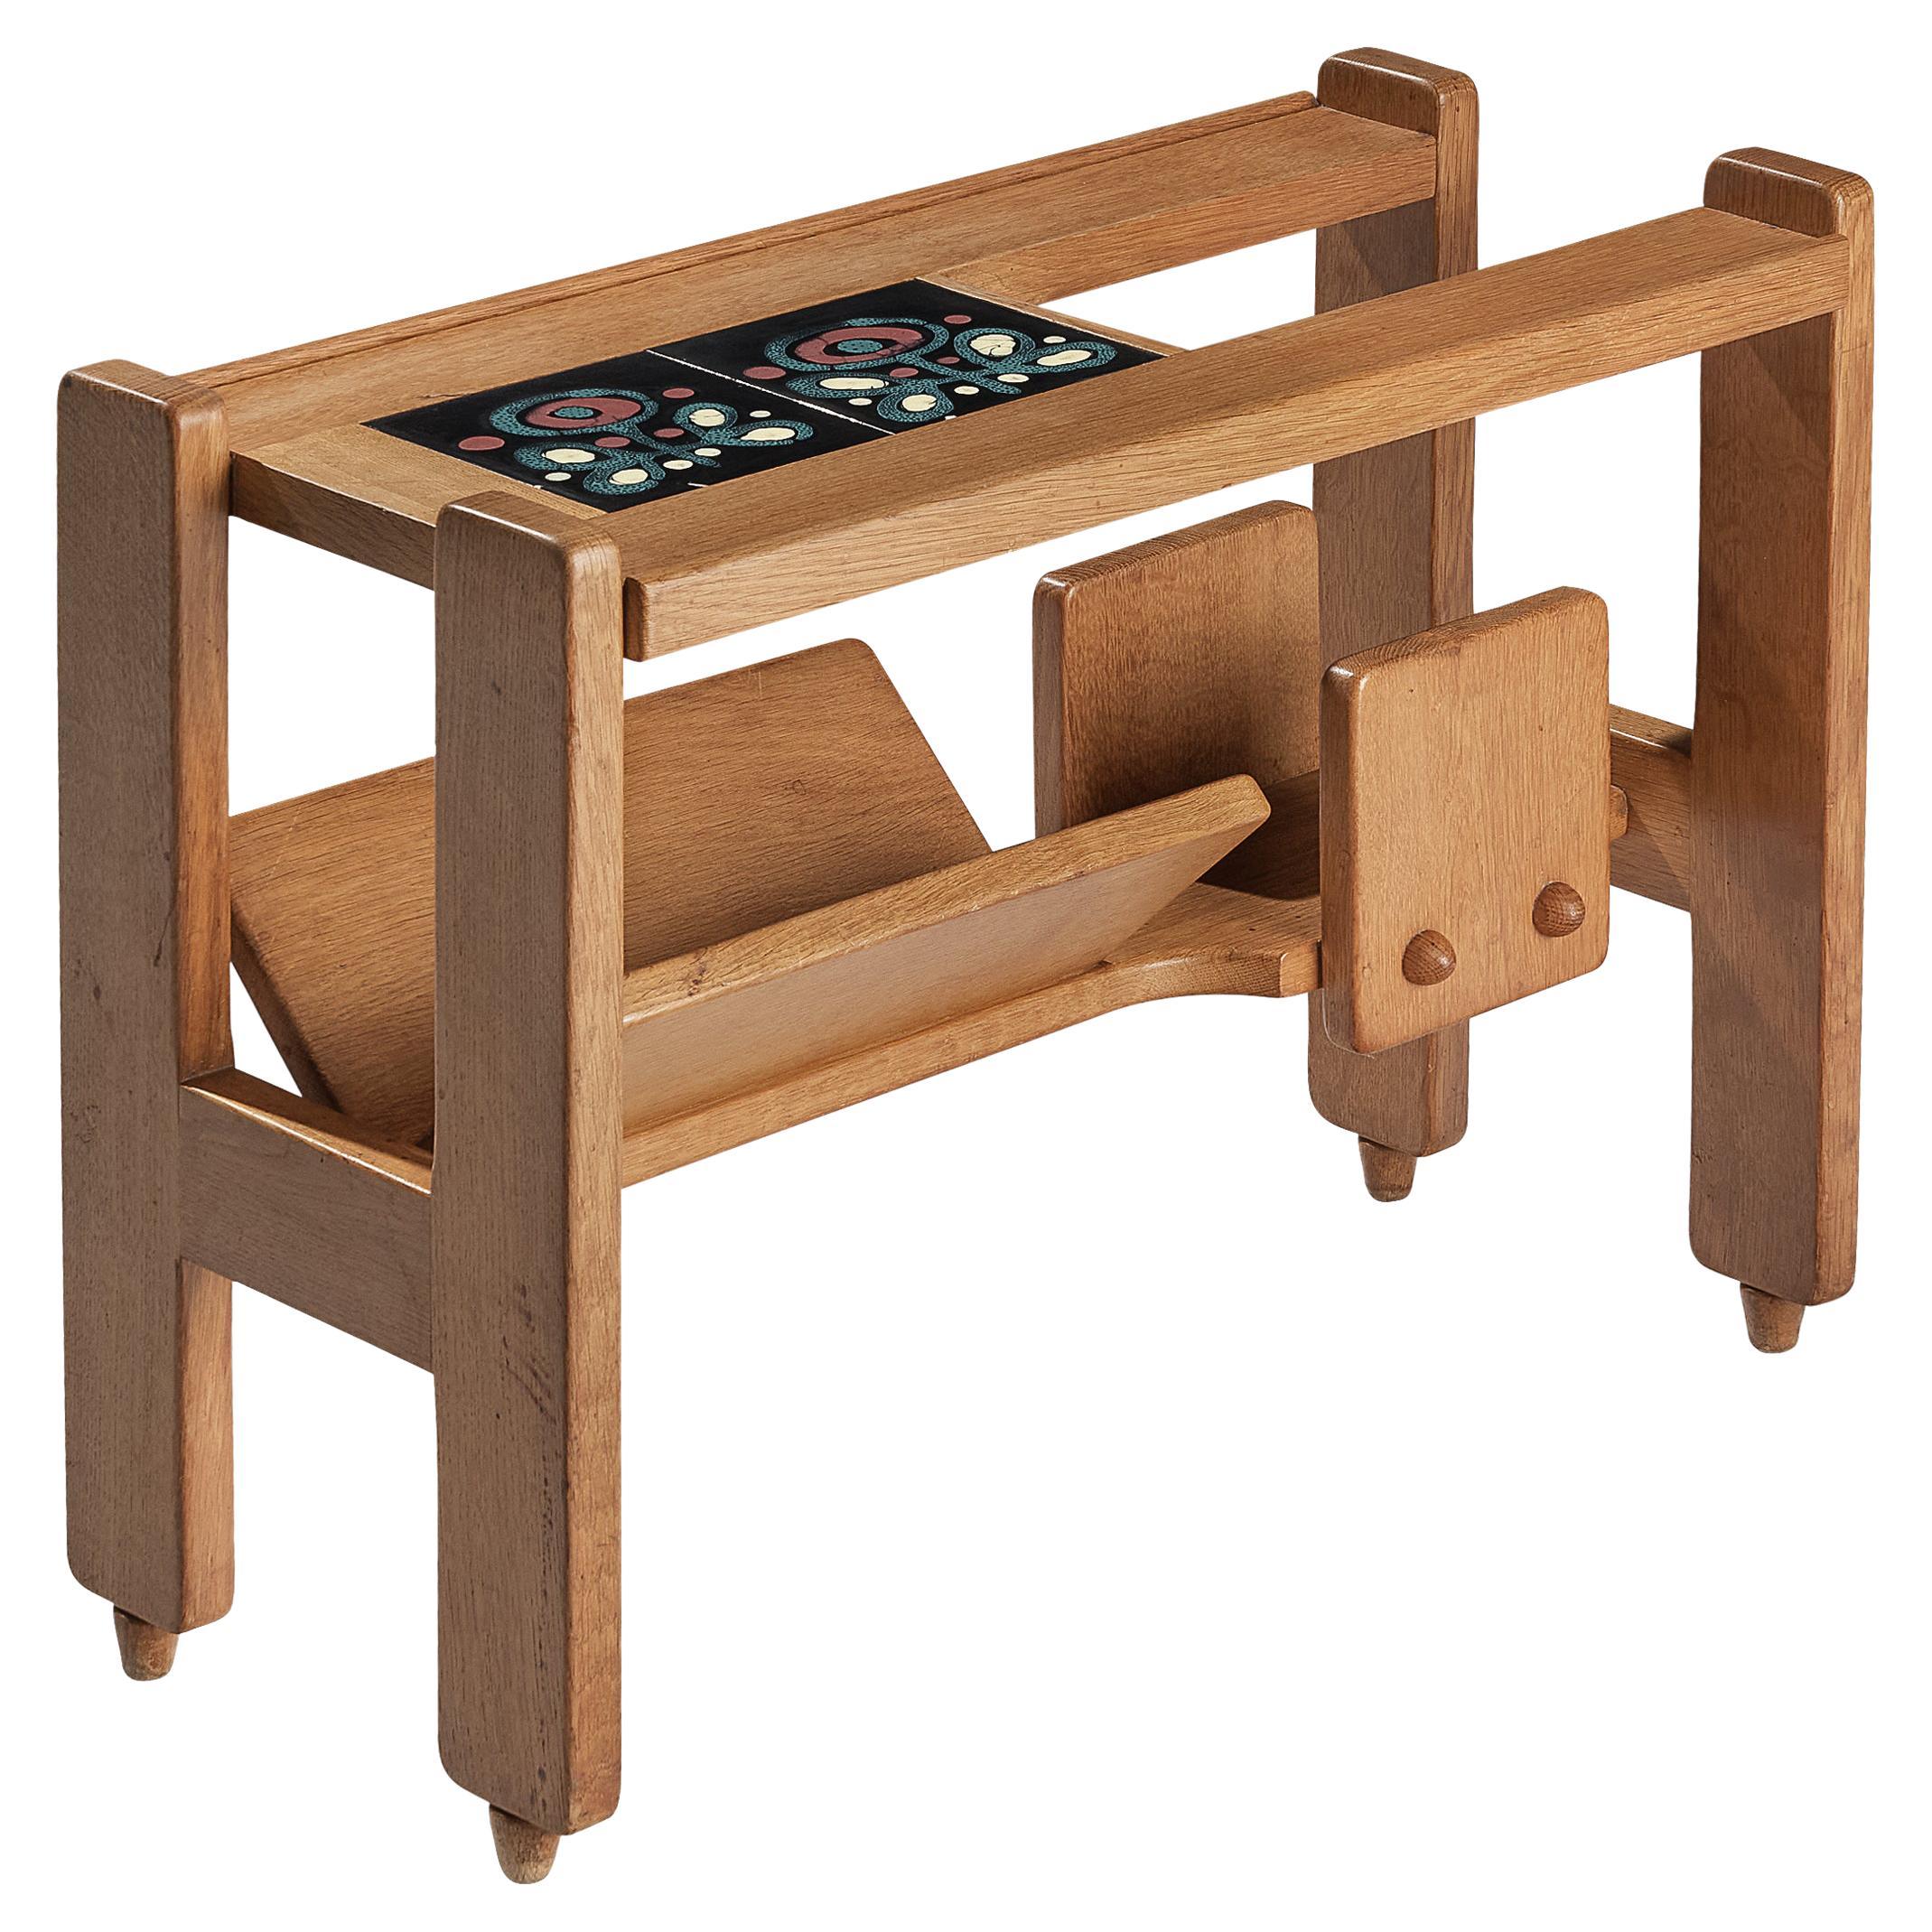 Guillerme & Chambron Magazine Rack in Oak with Ceramic